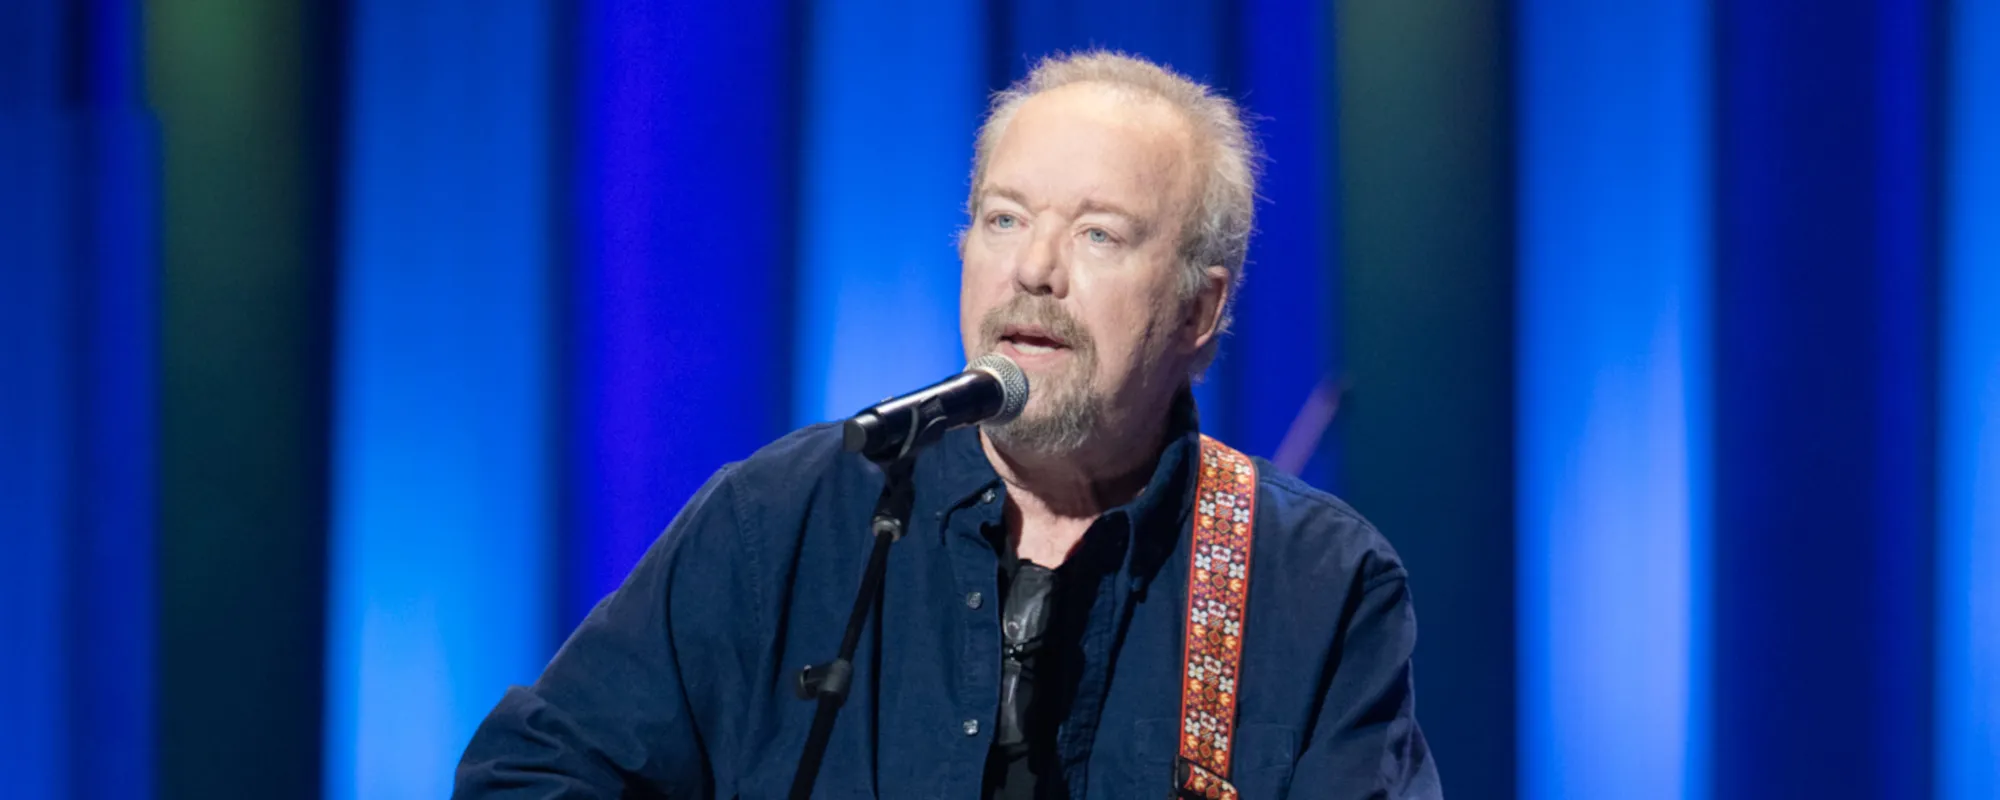 Country Hitmaker Don Schlitz Becomes First Non-Artist Songwriter to be Inducted into the Grand Ole Opry